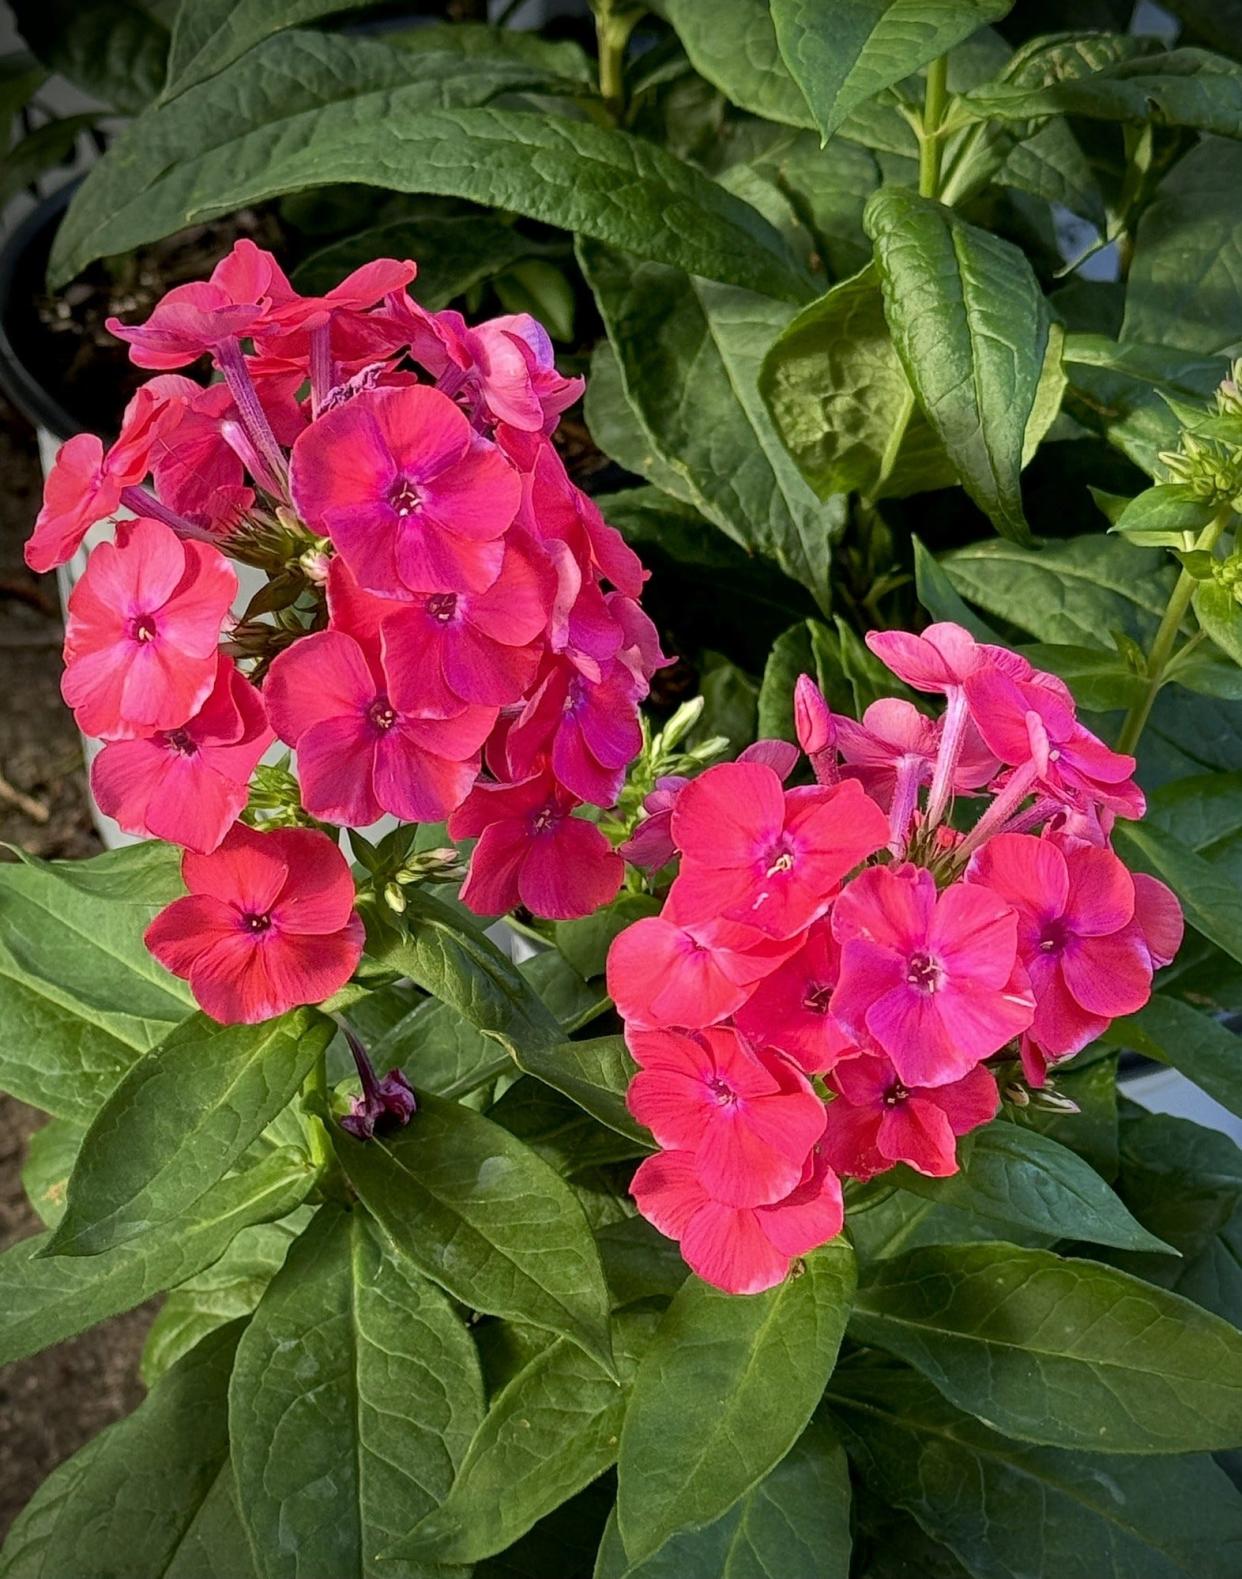 Luminary Sunset Coral is a relatively new variety of the tall garden phlox with irresistible color, tantalizing fragrance and the ability to bring in bees, butterflies and hummingbirds.